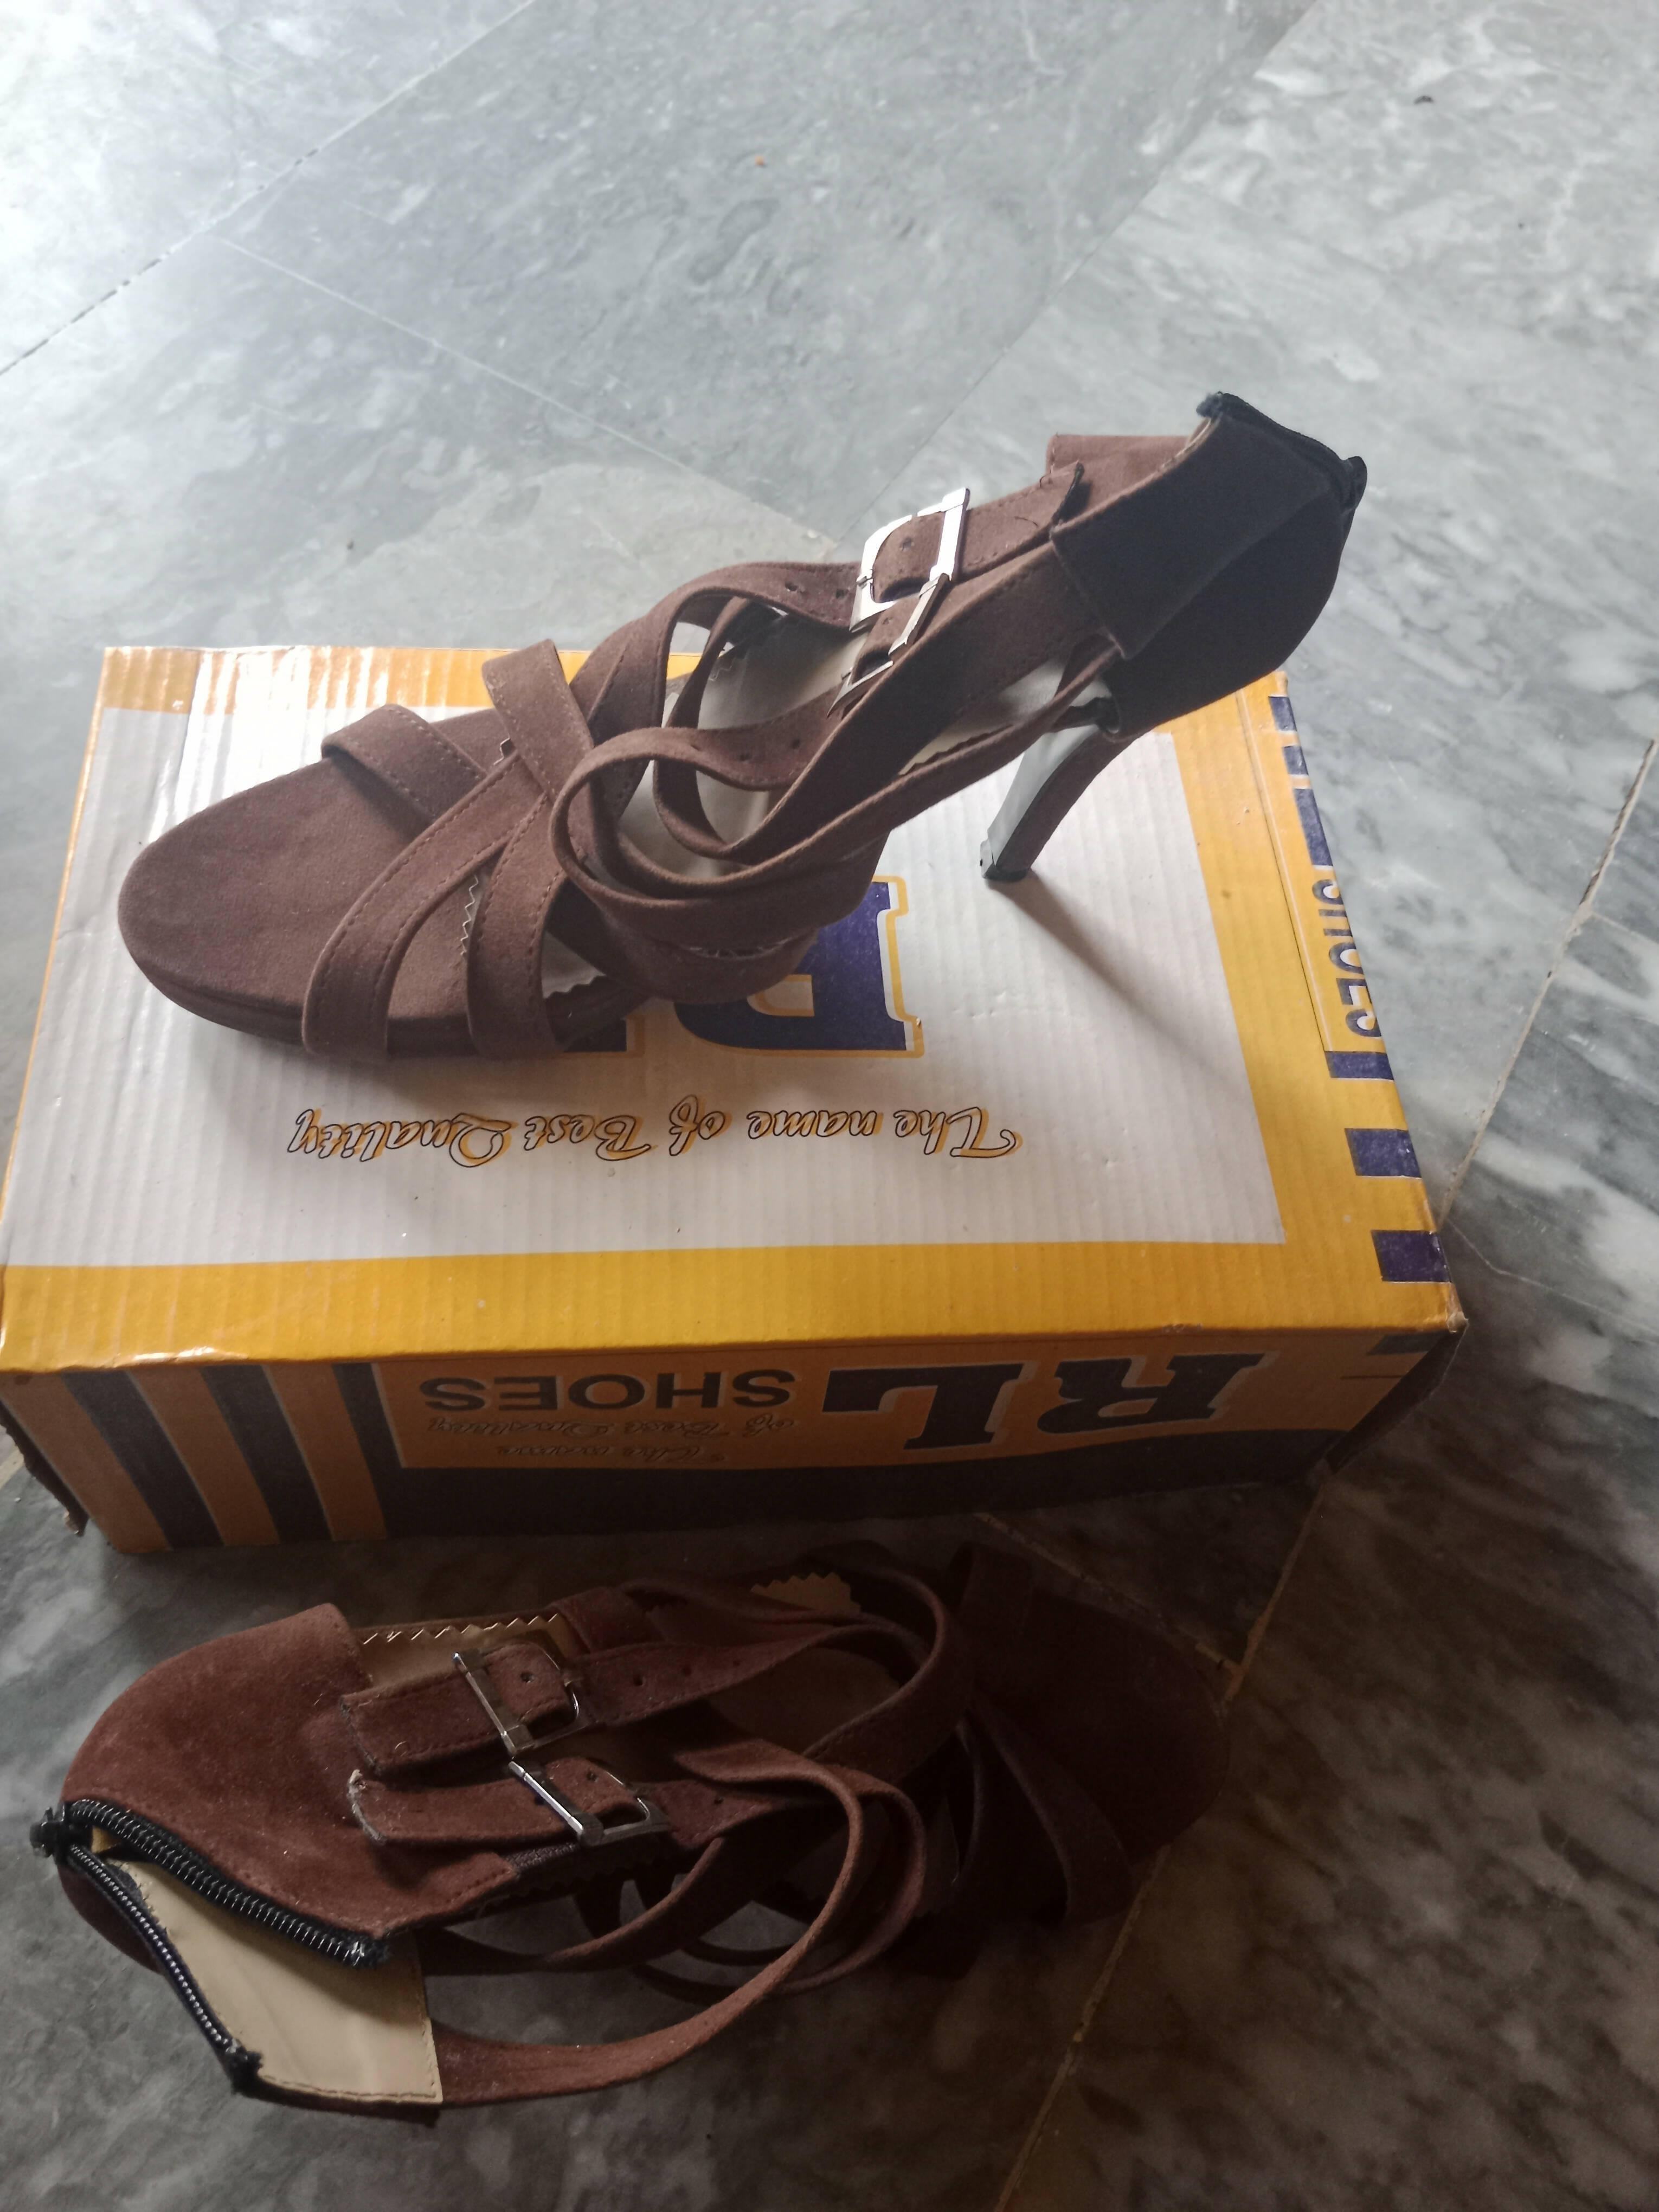 Stylish Brown Heel Shoes | Women Shoes | Size: 40 | New